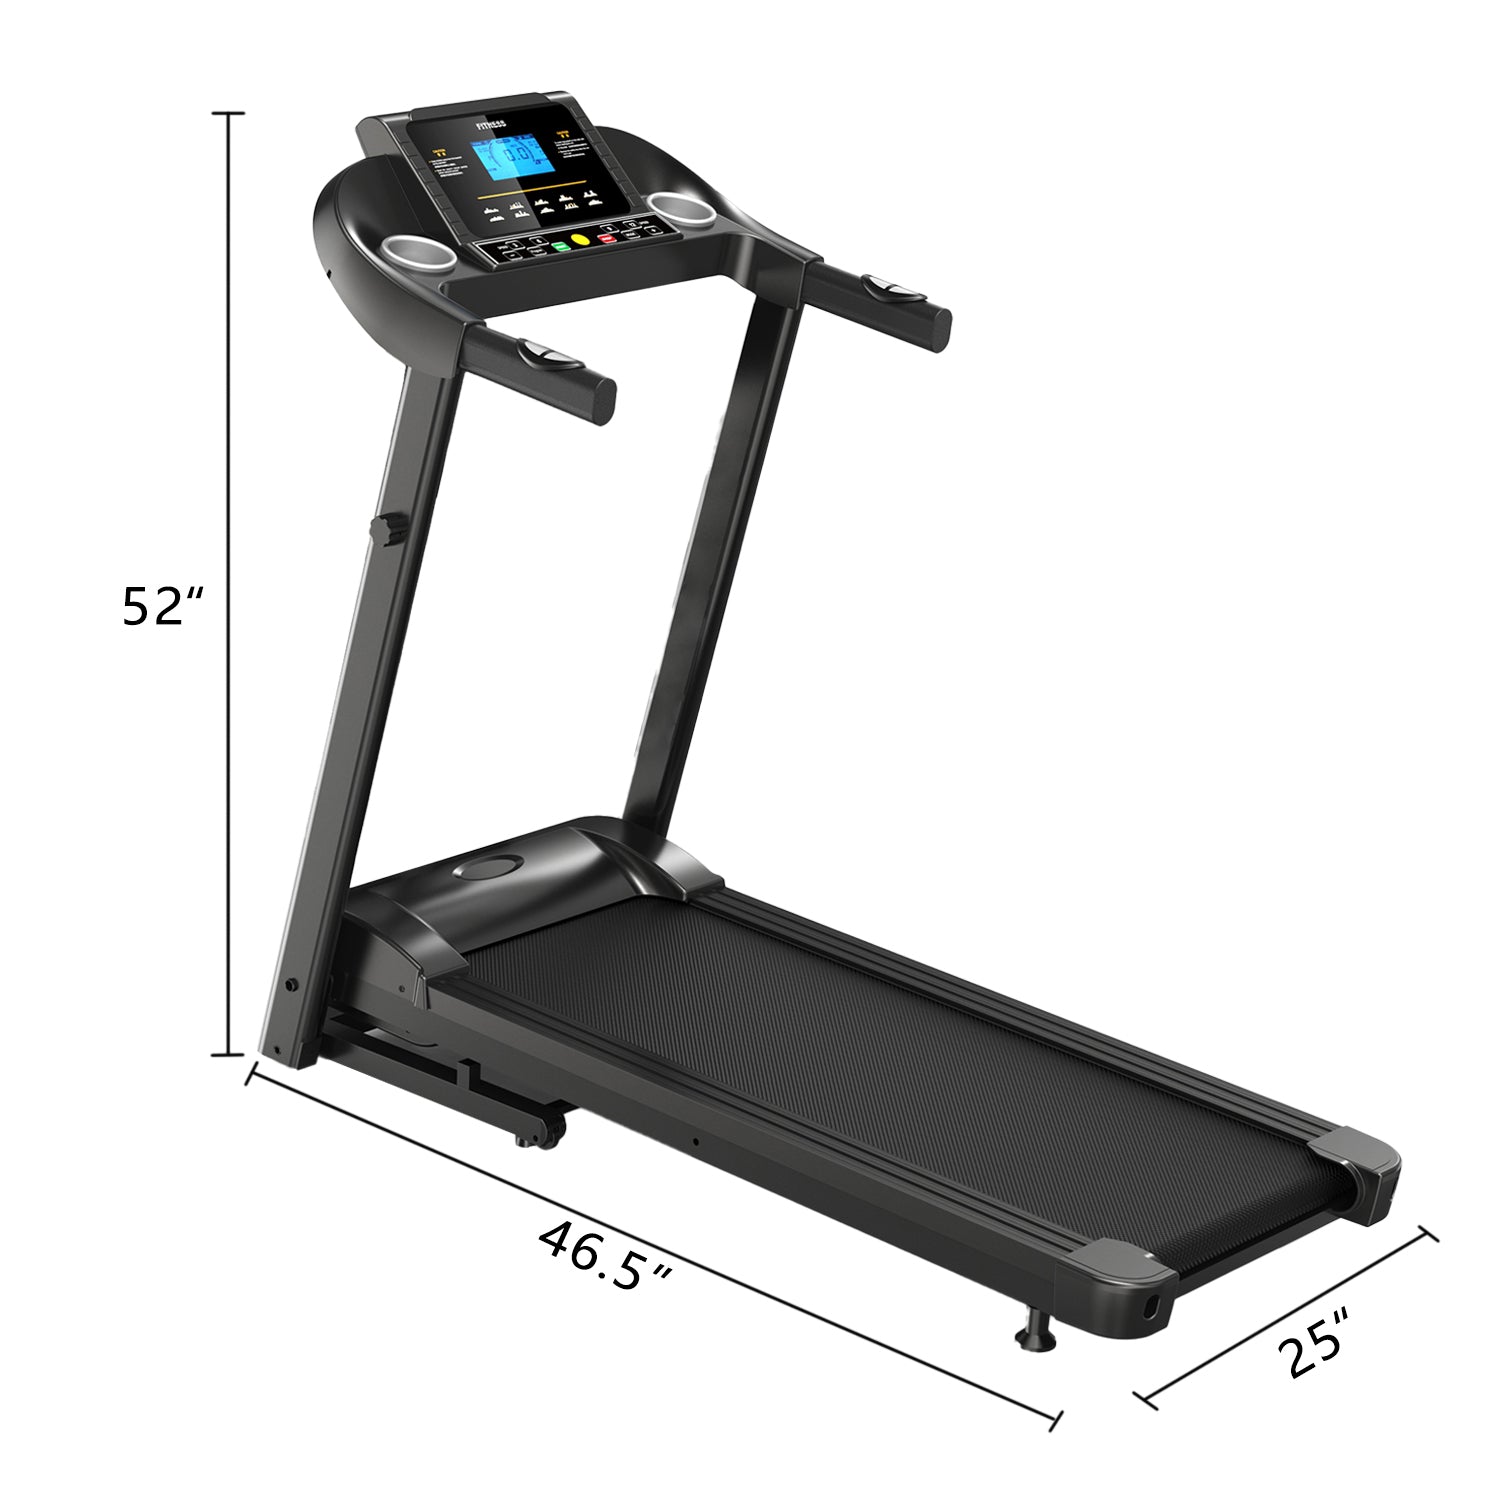 Home Gym Smart Fitness Equipment Foldable Motorized Treadmill 5" LCD Display with Air Spring, Manual Incline, MP3